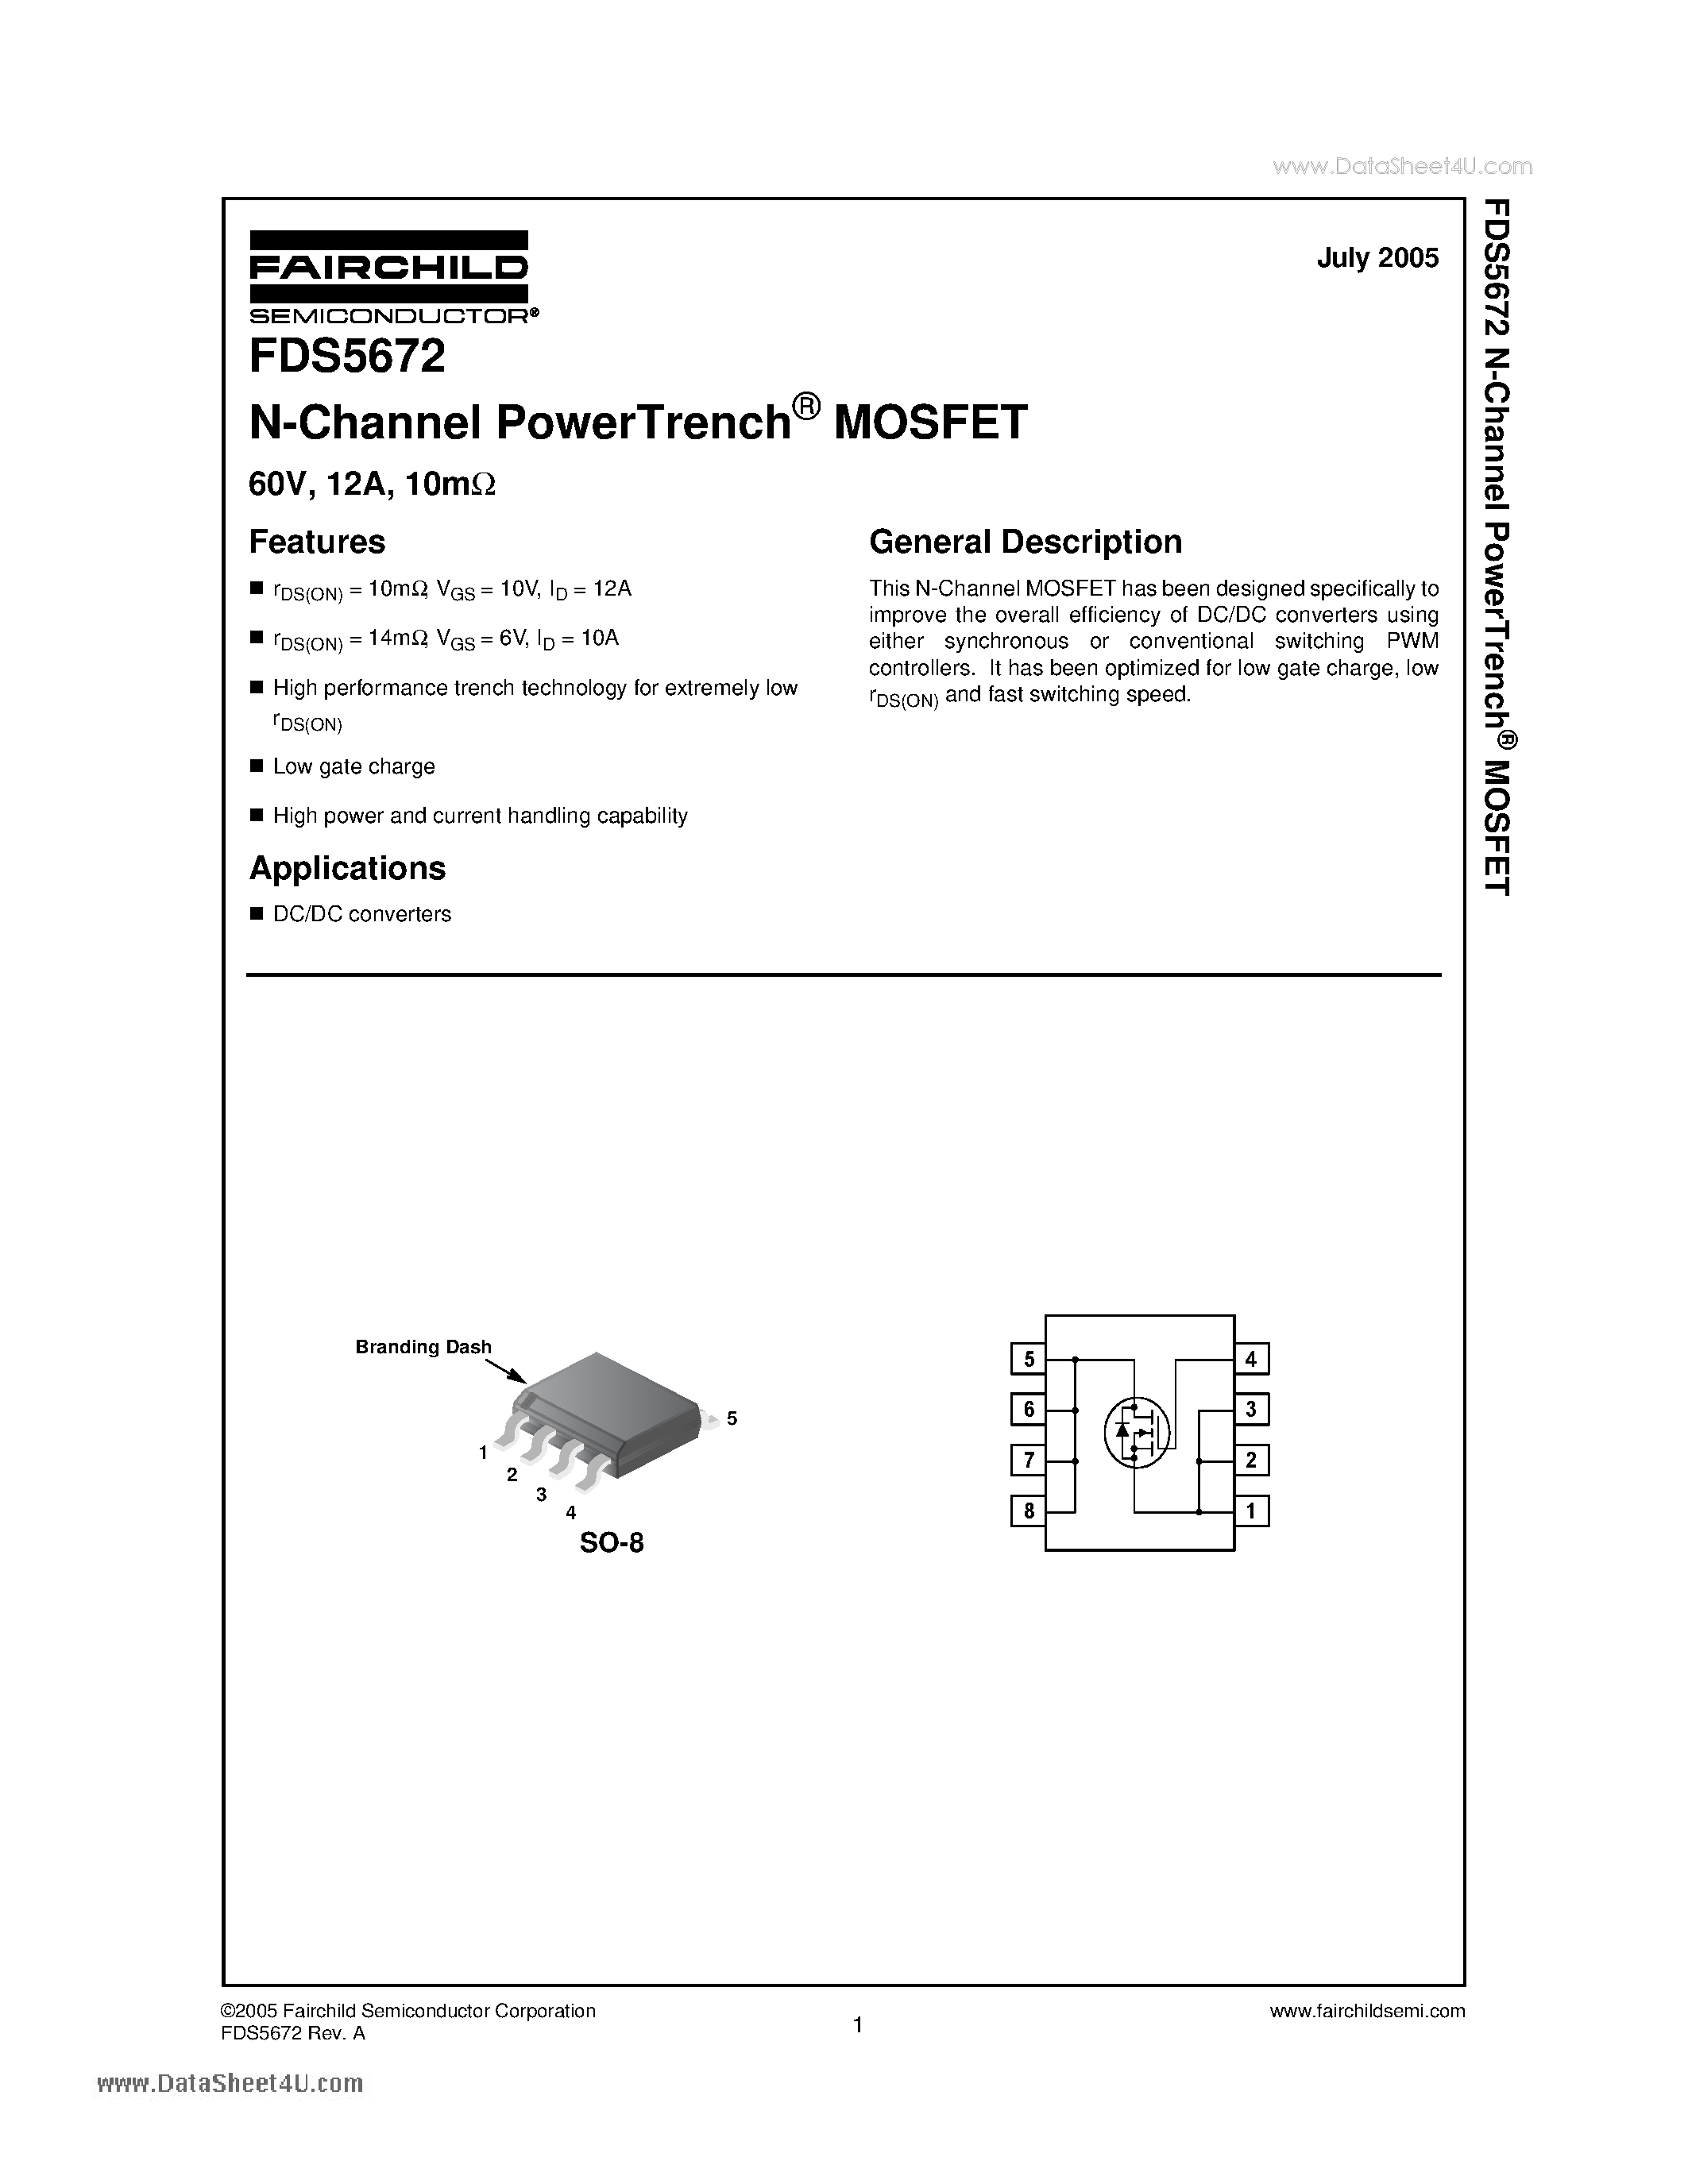 Даташит FDS5672 - N-Channel PowerTrench MOSFET страница 1